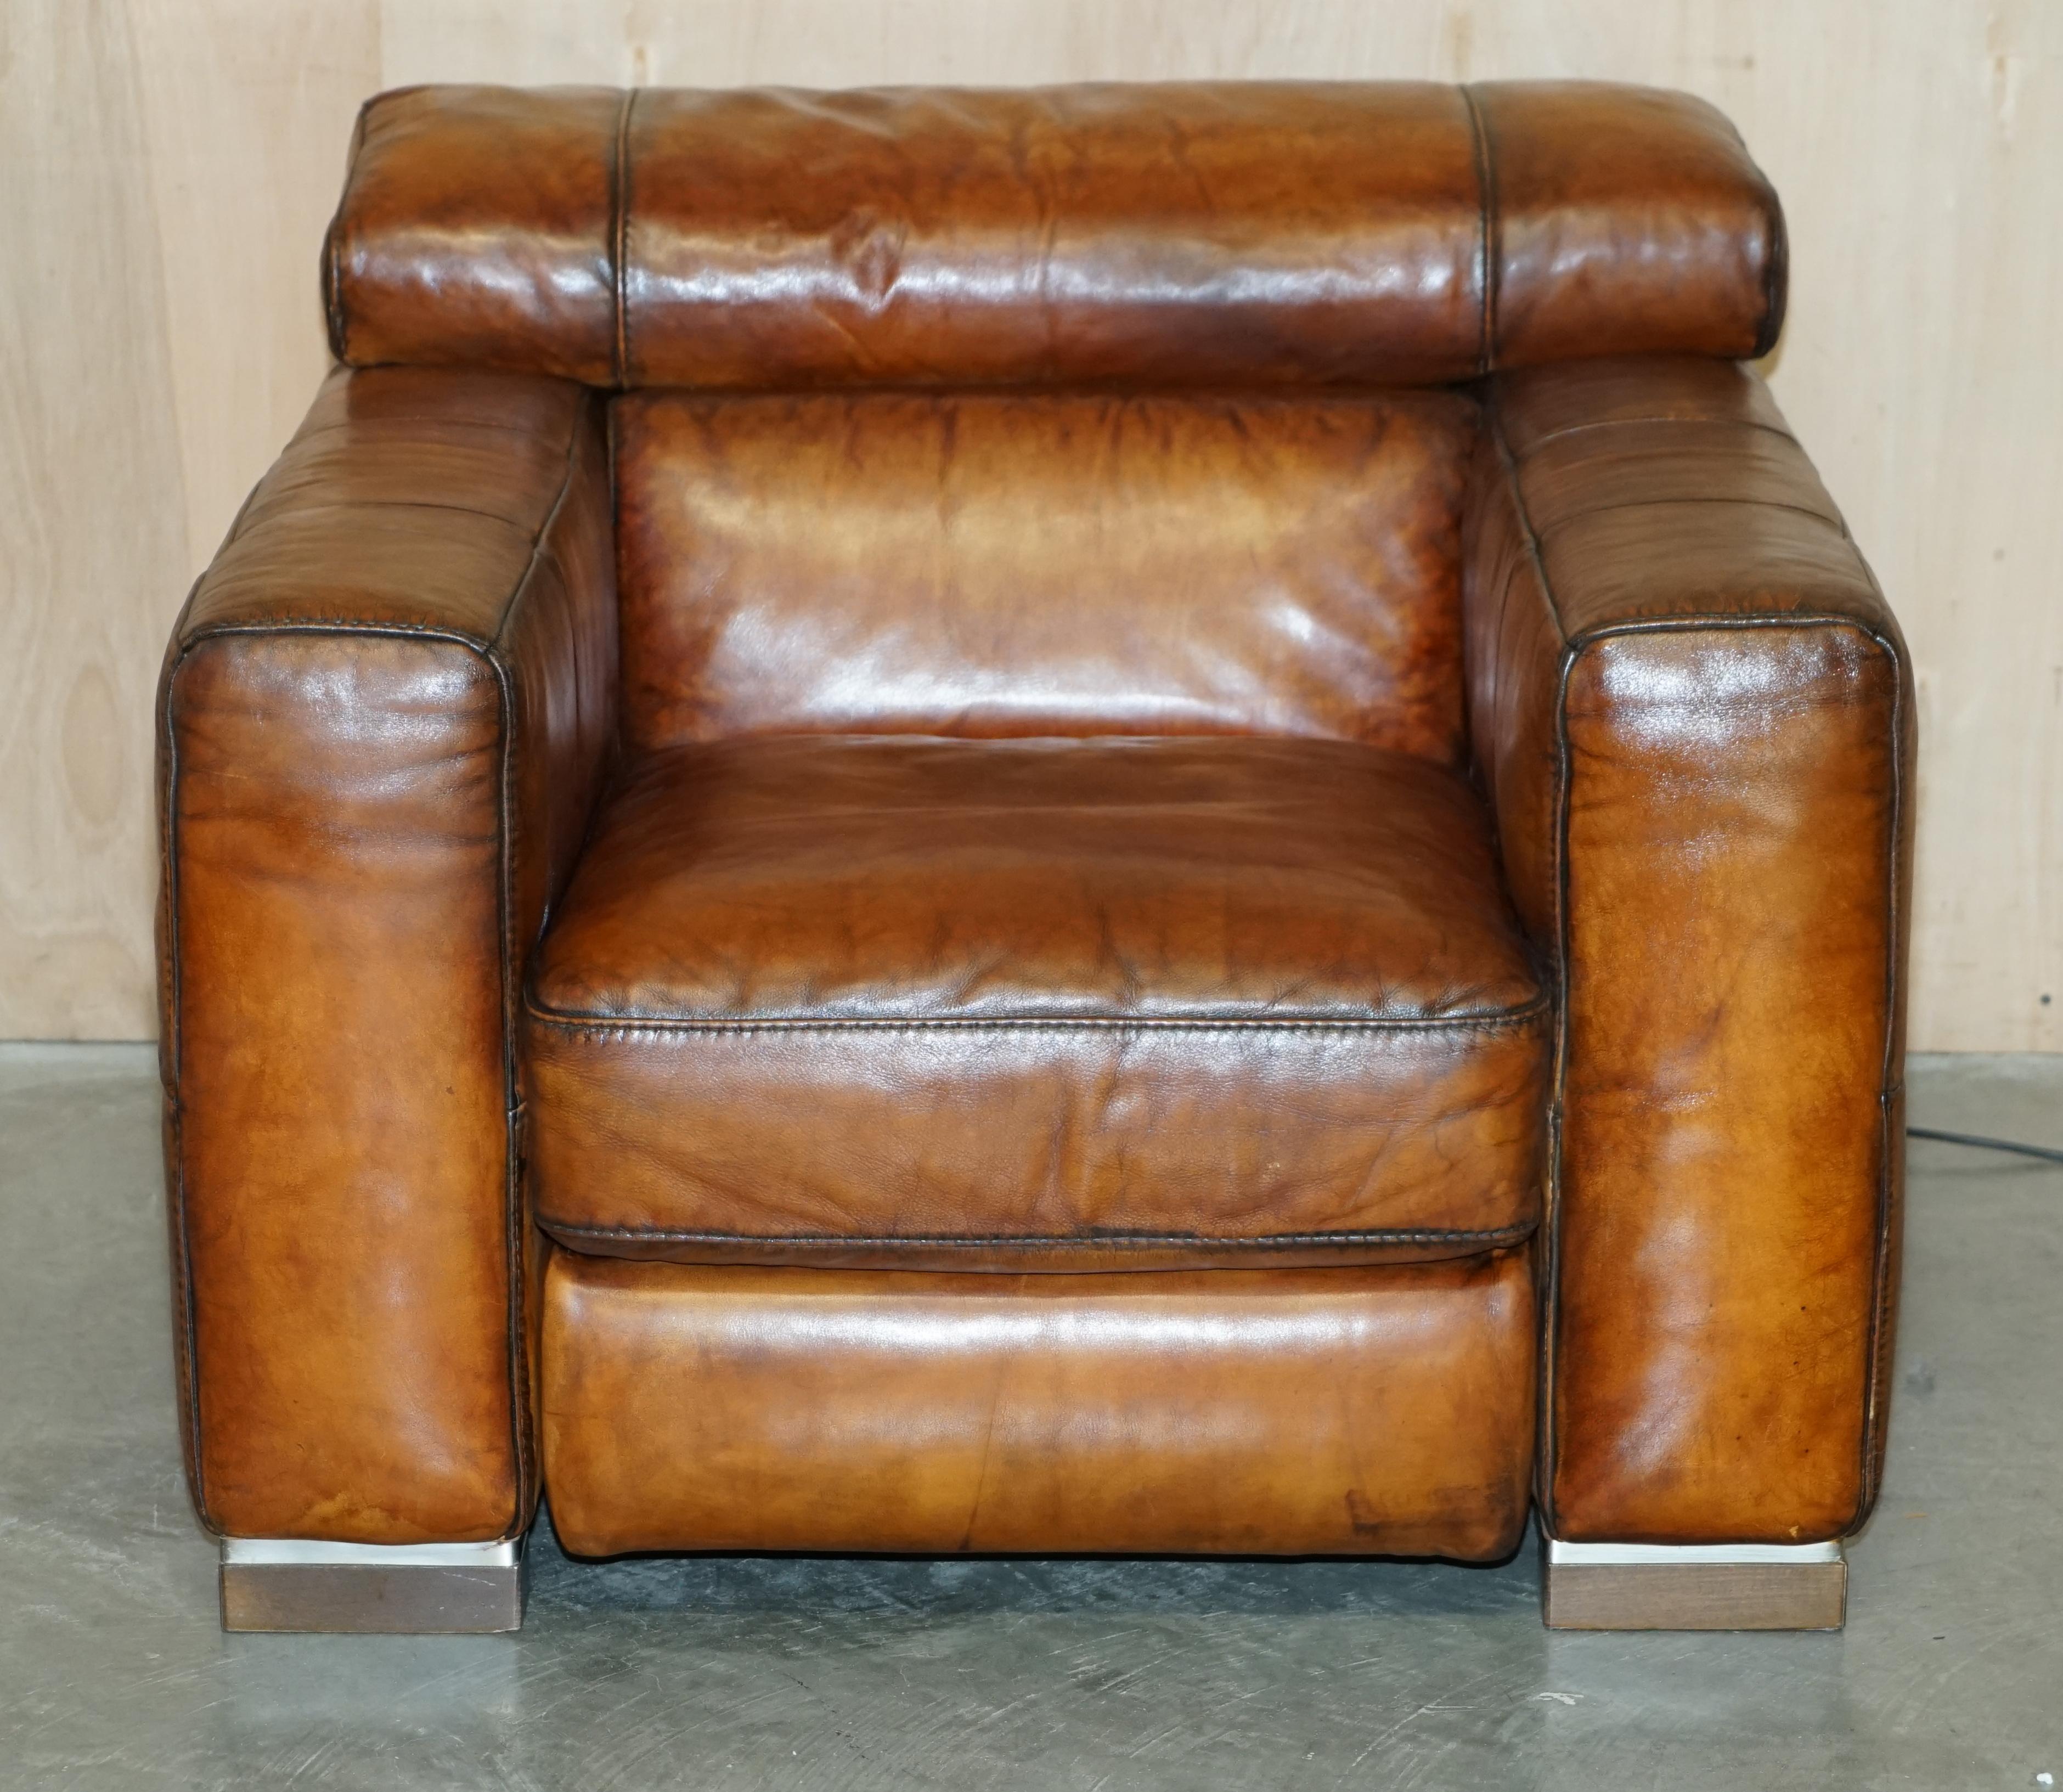 We are delighted to offer for sale this fully restored, one of a kind, Natuzzi Editions Roma, hand dyed cigar brown leather armchair with Electric rising headrest and small footrest that is part of a large suite.

This armchair is part of a suite